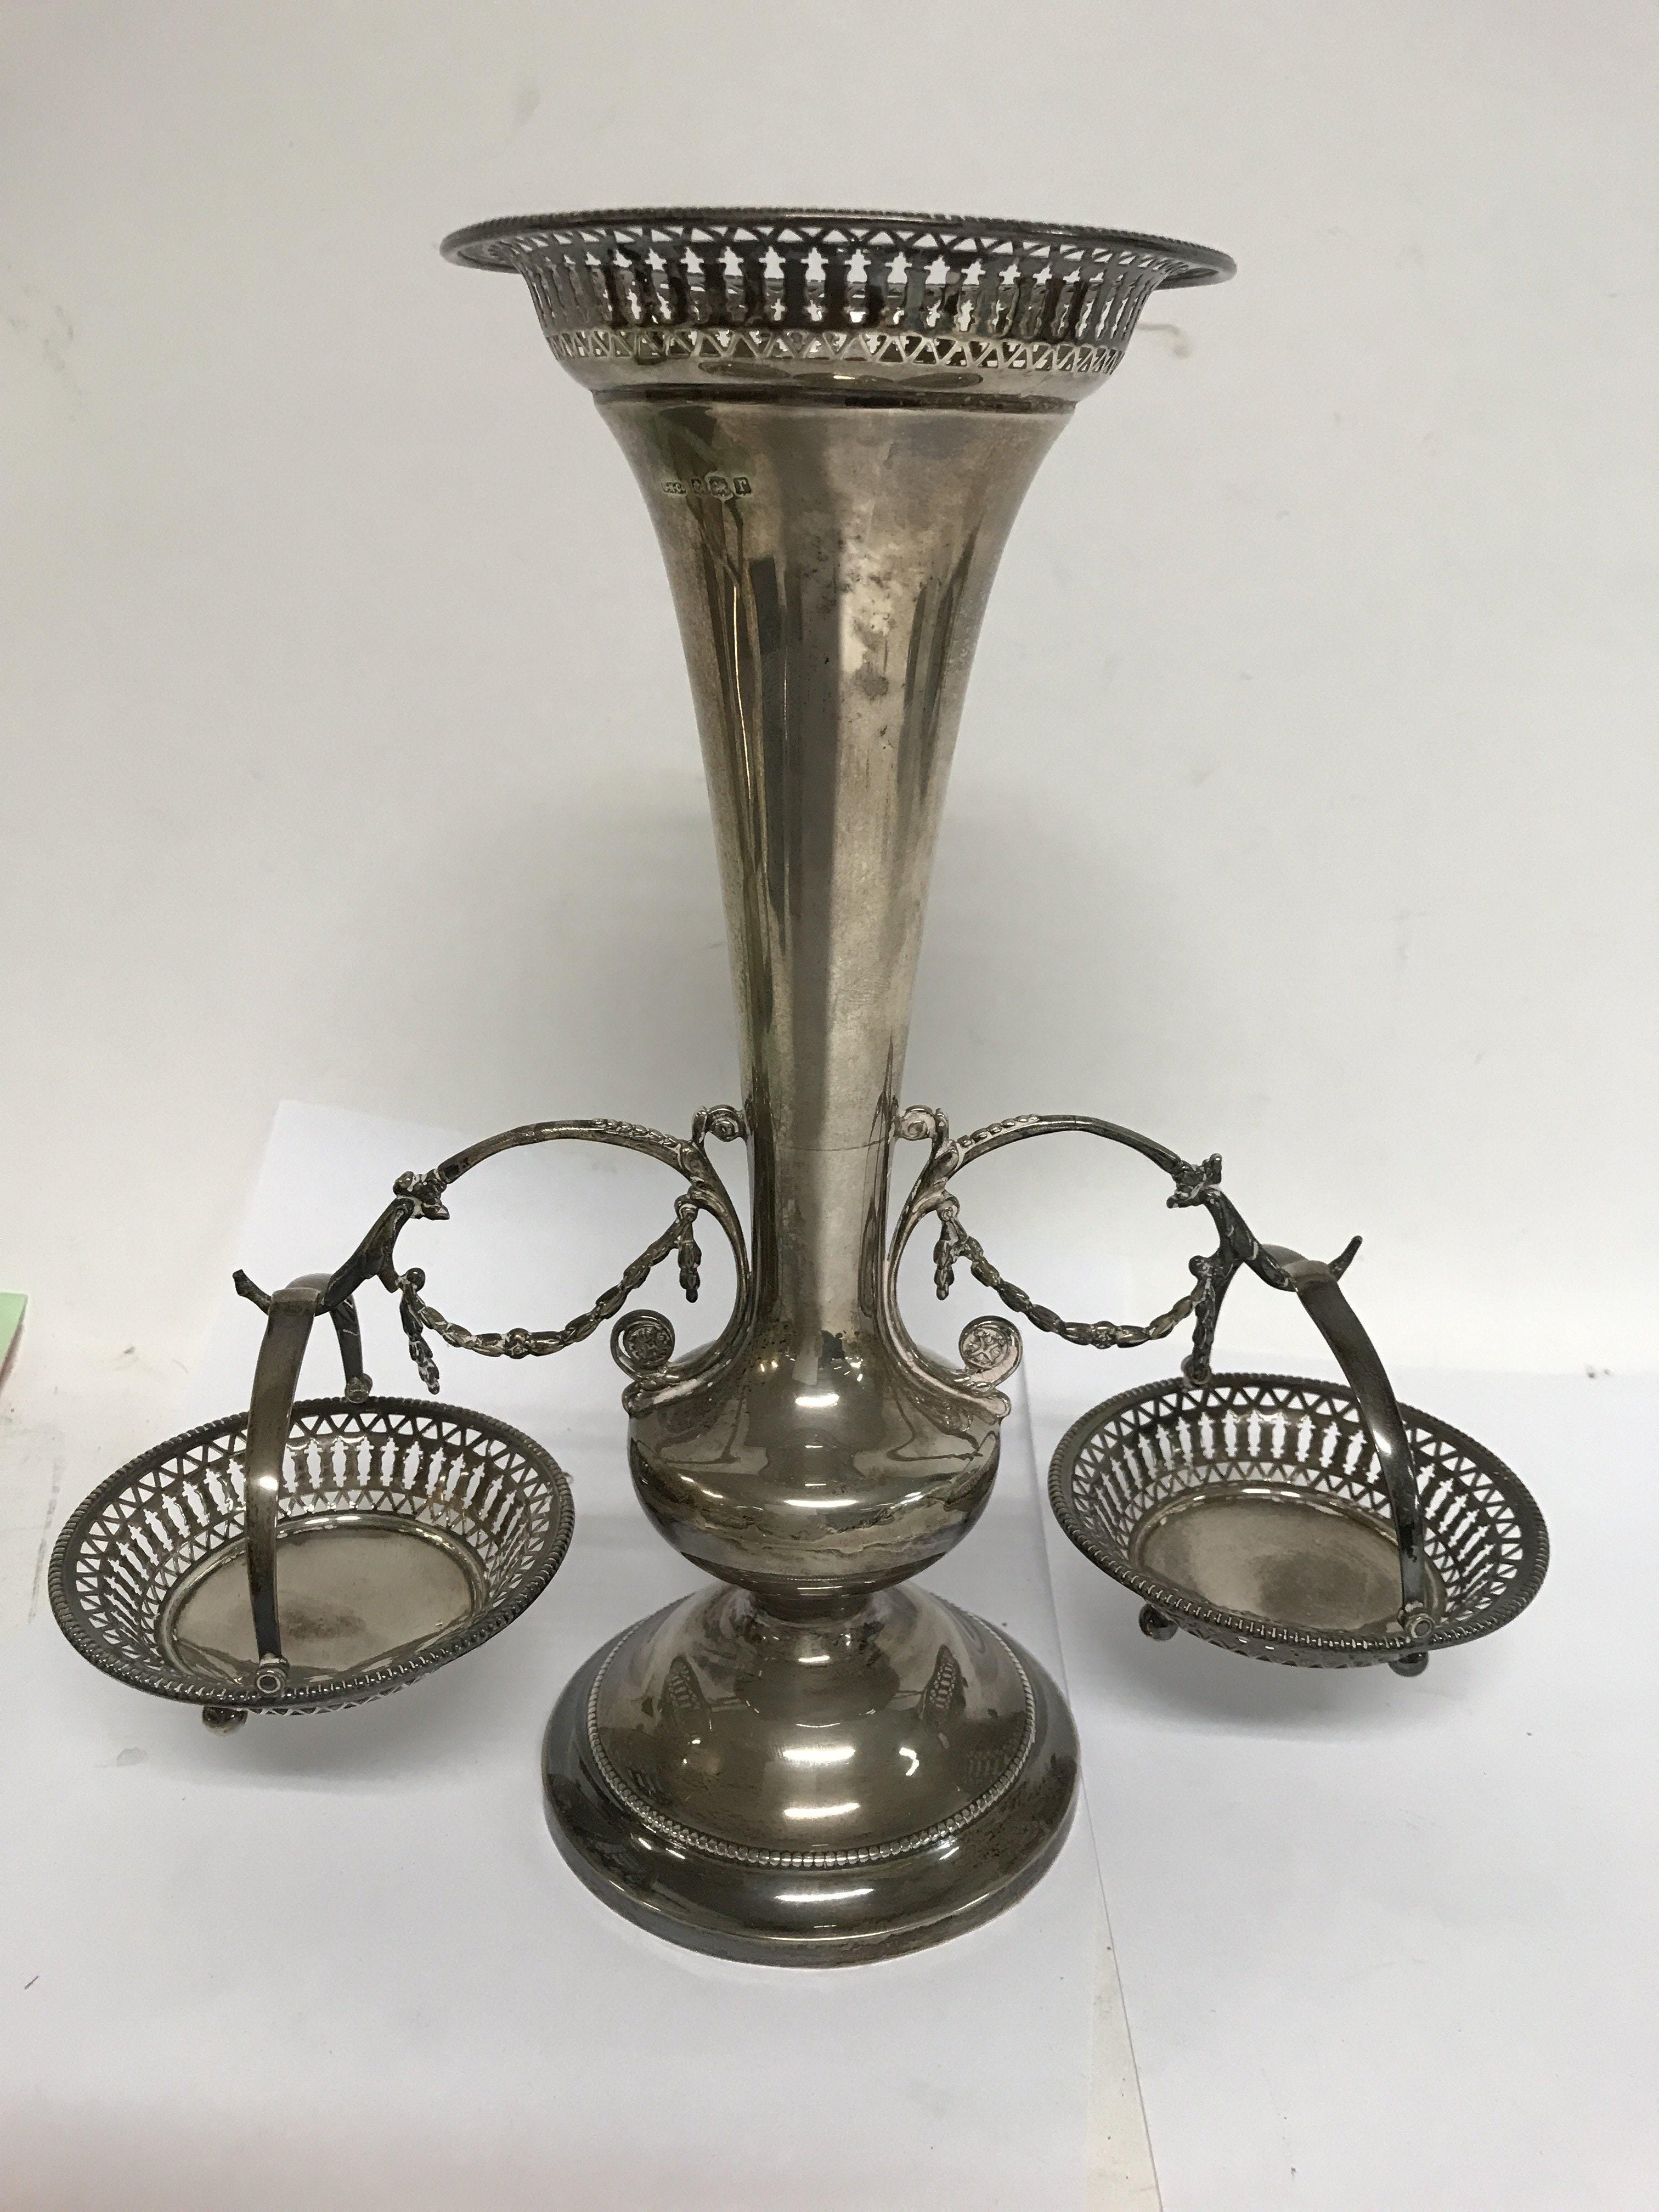 A silver trumpet vase with applied hanging baskets